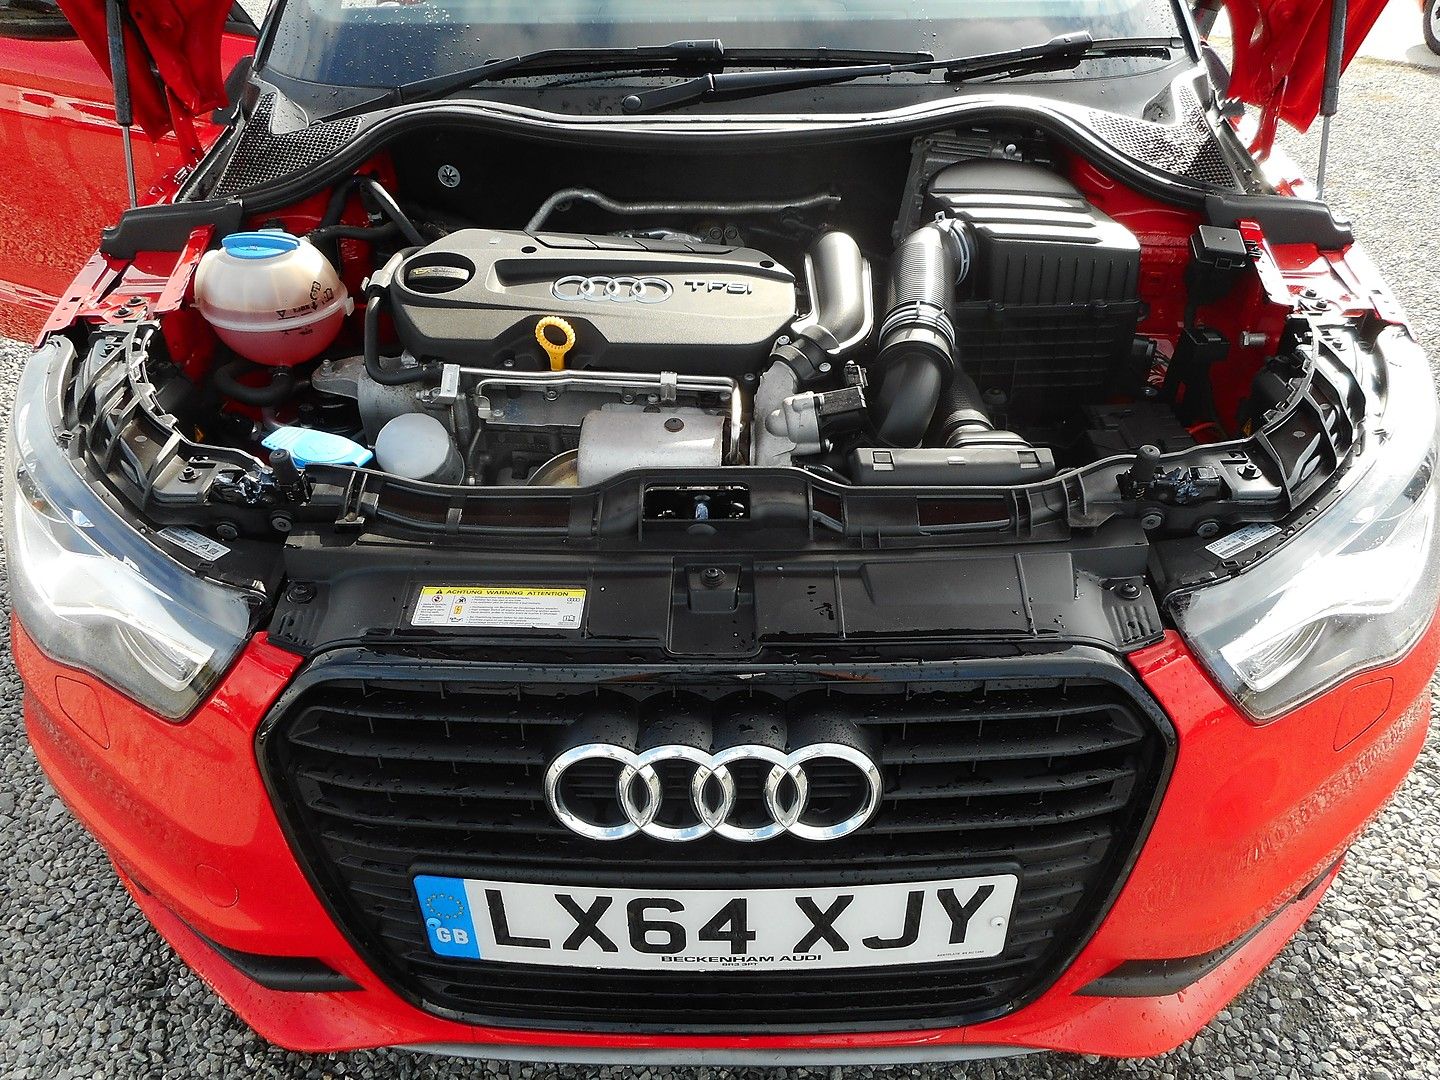 AUDI A1 Sportback 1.4 TFSI S line Style Edition 122PS (2014) - Picture 15